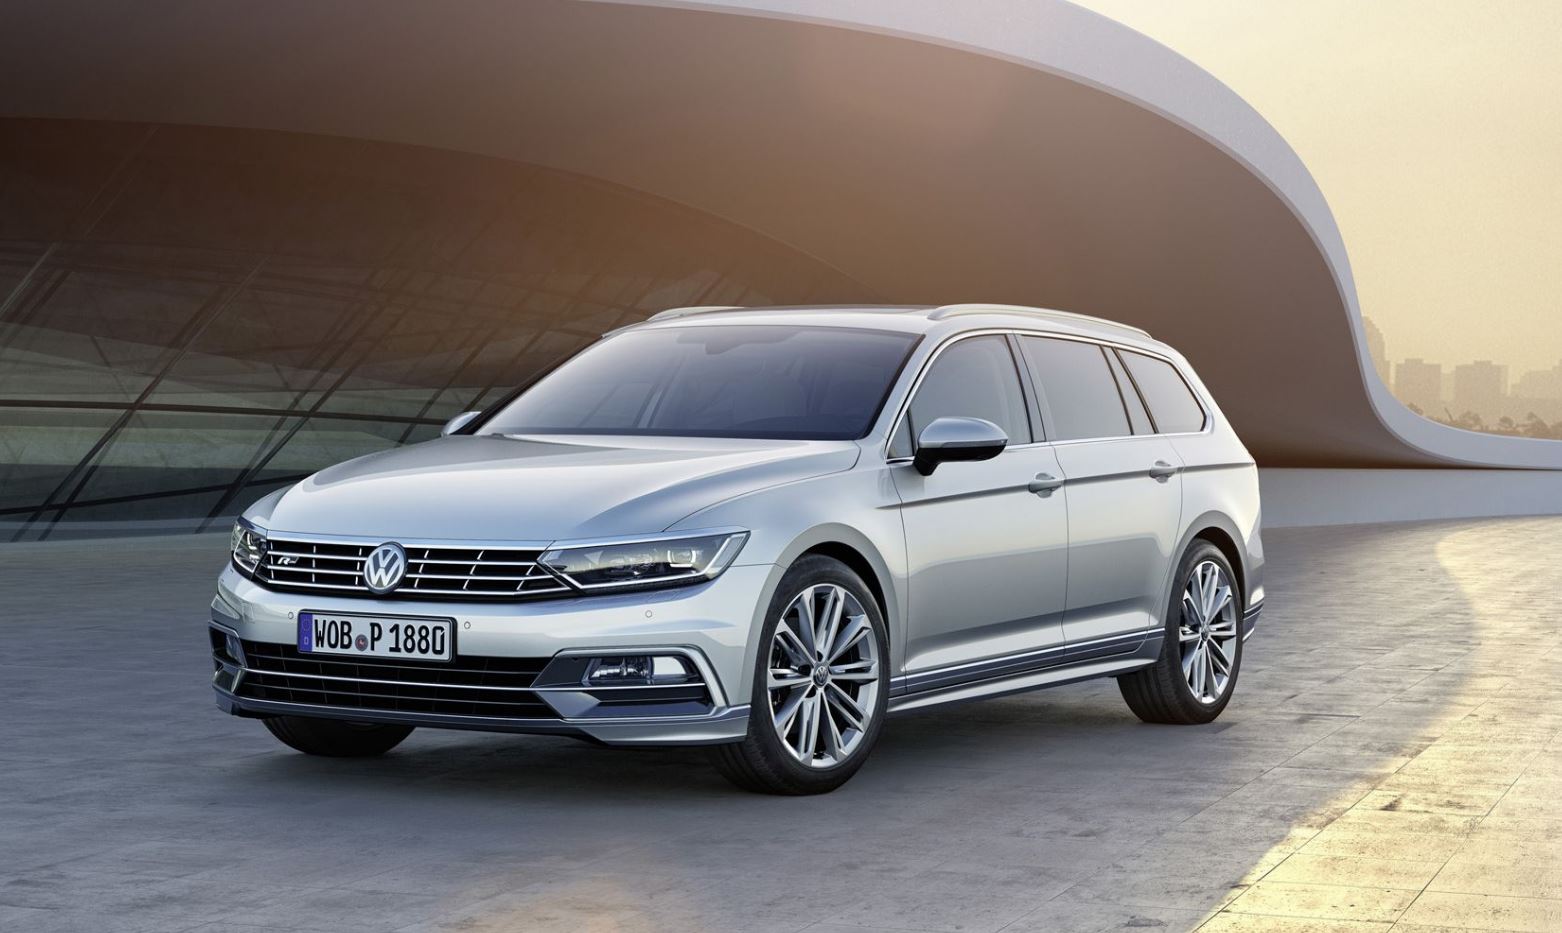 10 Must-Have Auto Parts Upgrades for Your Passat B8